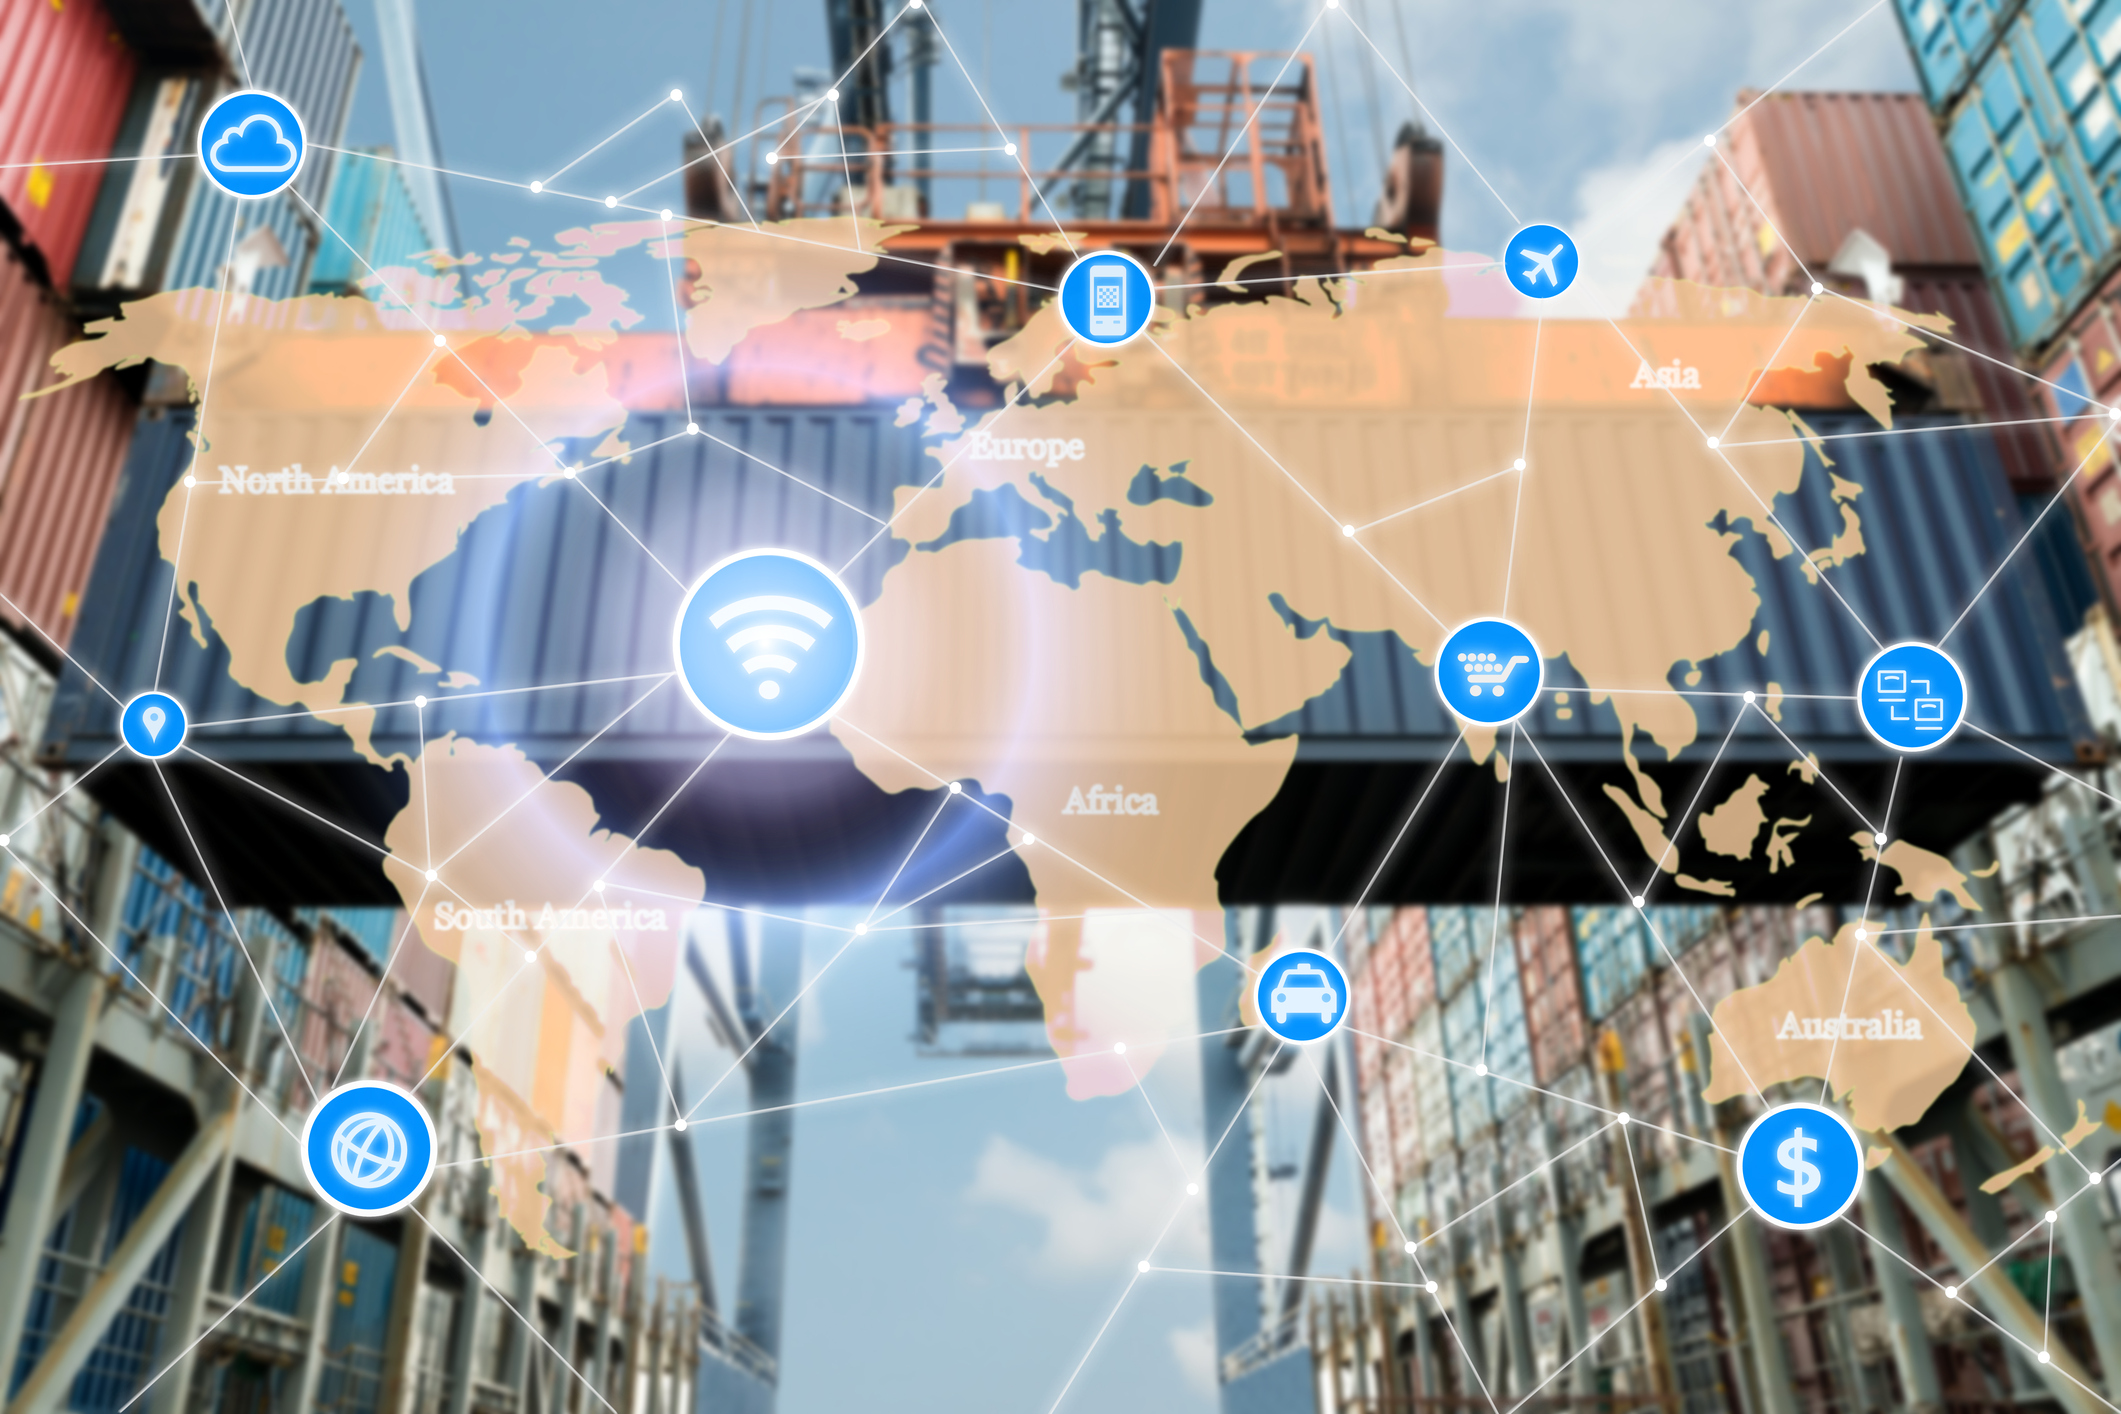 Digital transformation can help logistics innovate and improve process easily